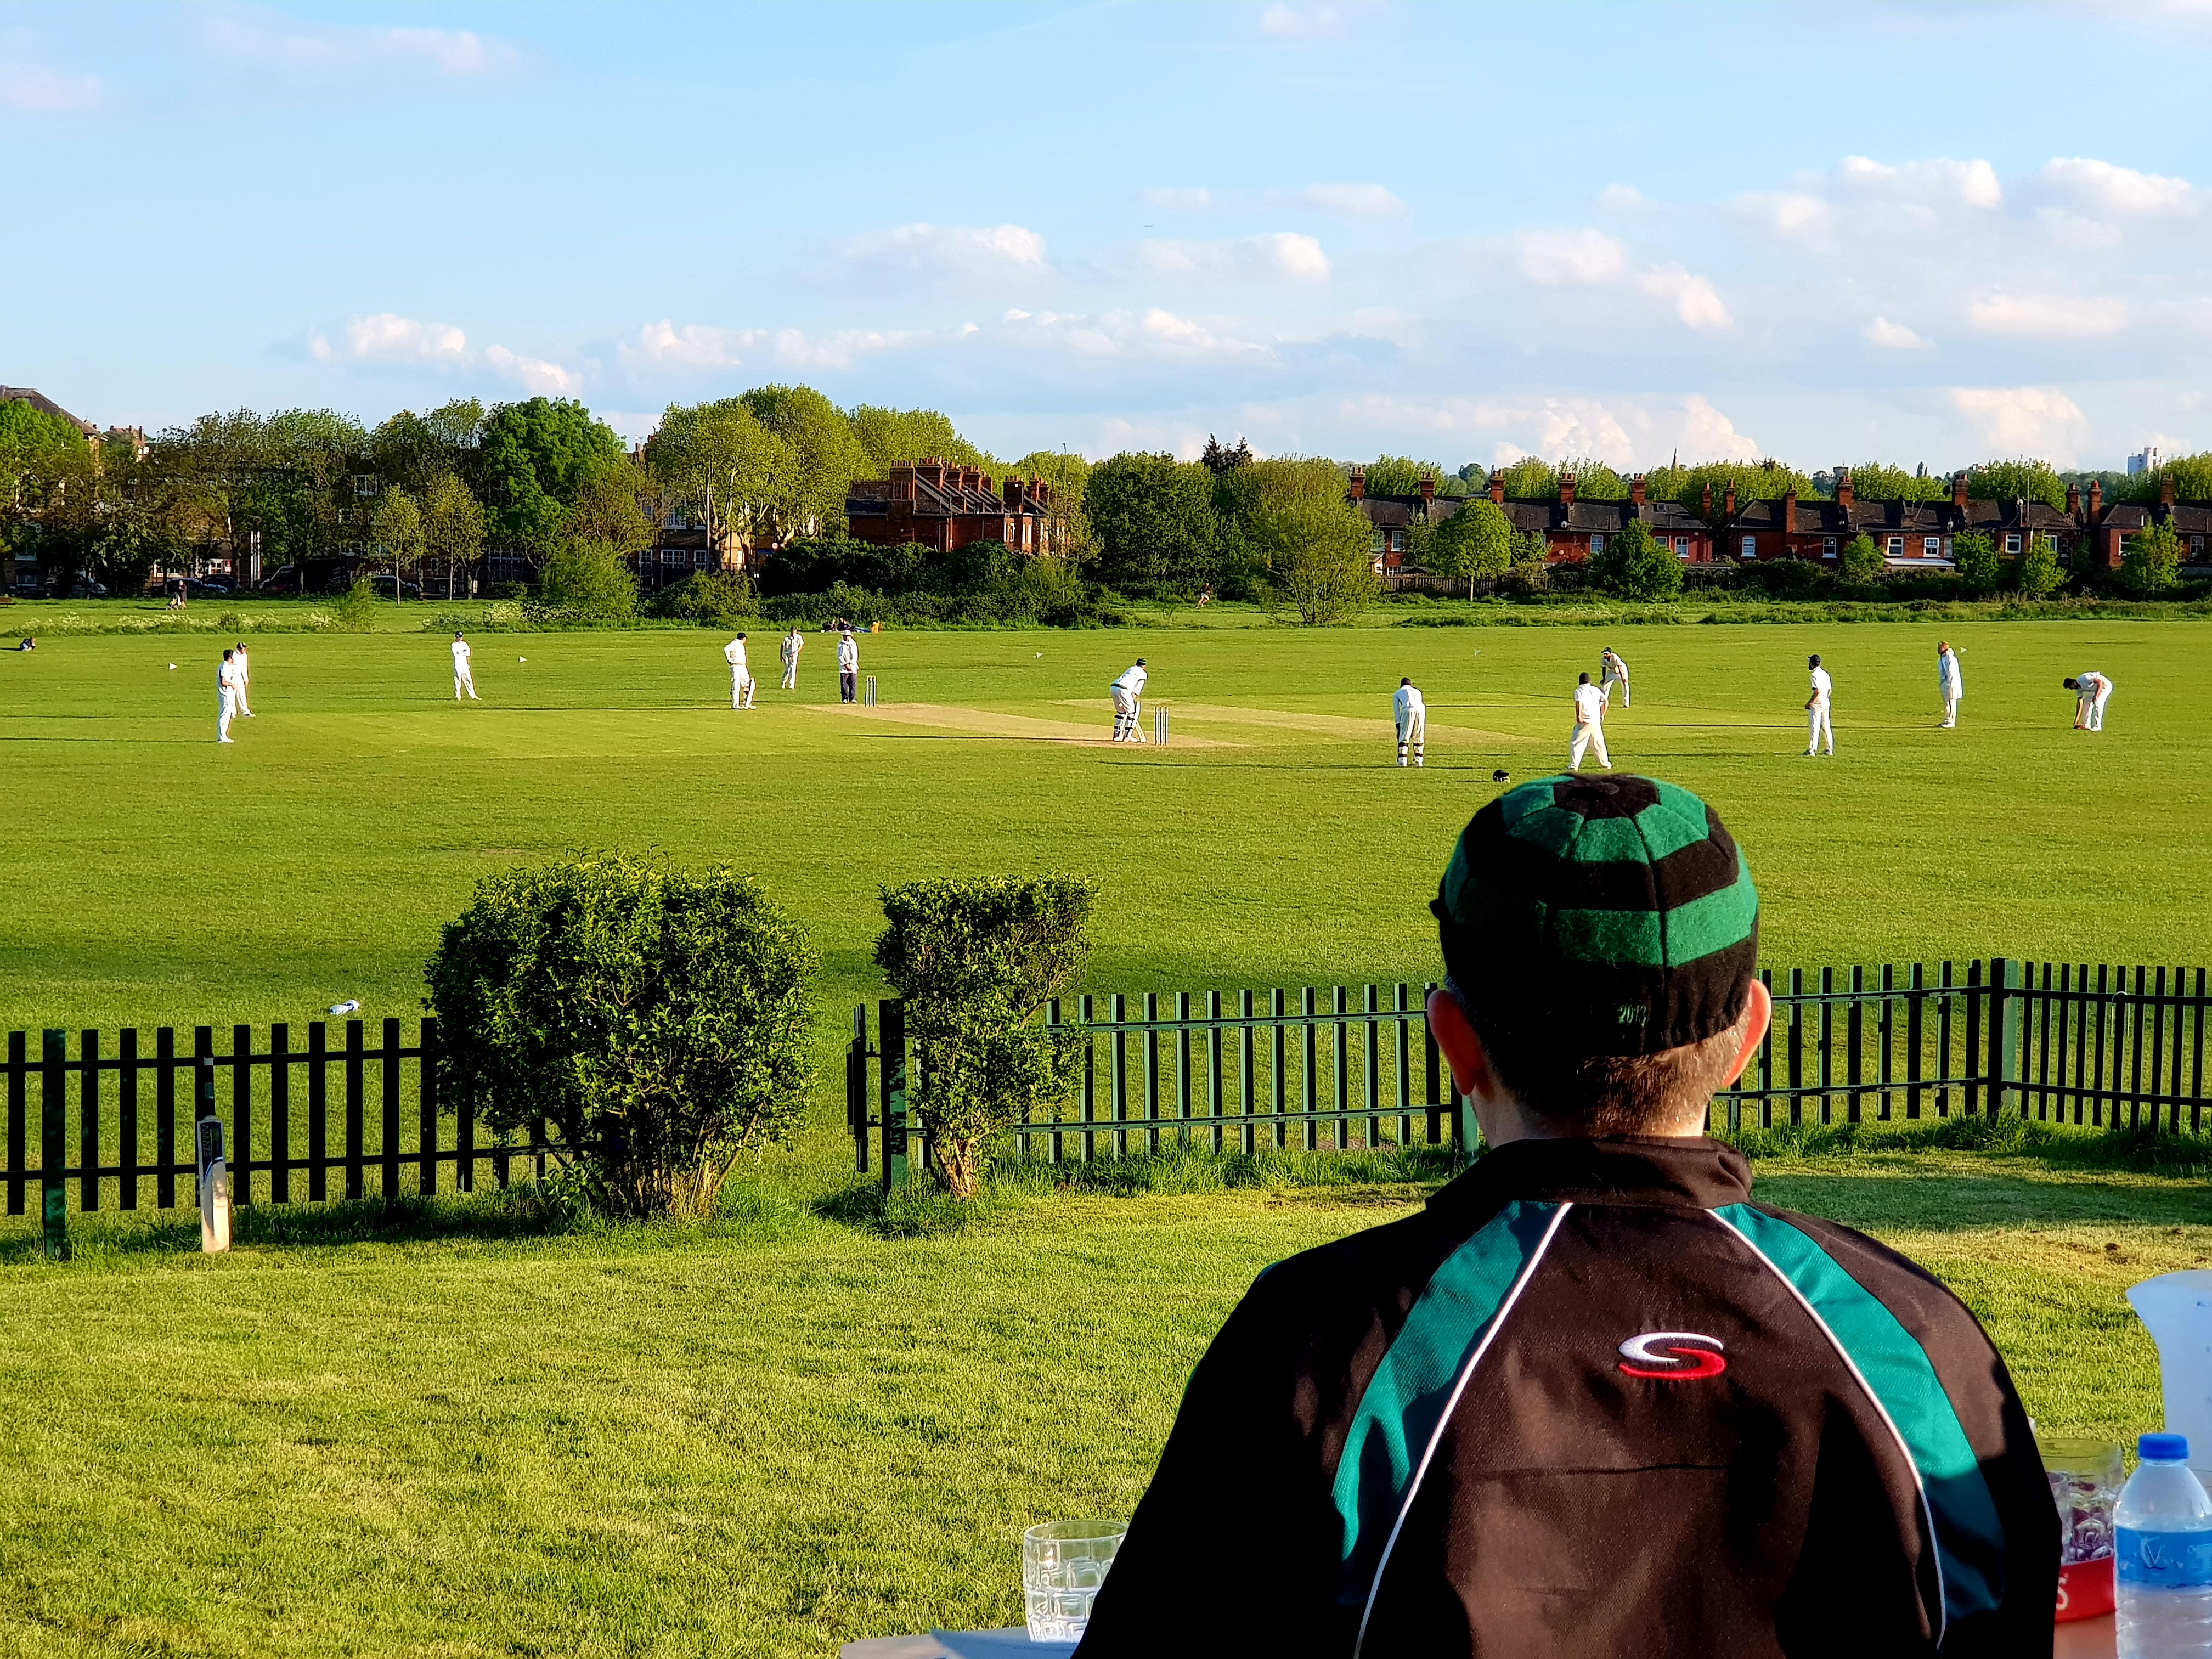 Australian Cricket Tours - A Players Sits On The Hill Looking Down Over A Match At Alexandra Park Cricket Club, London